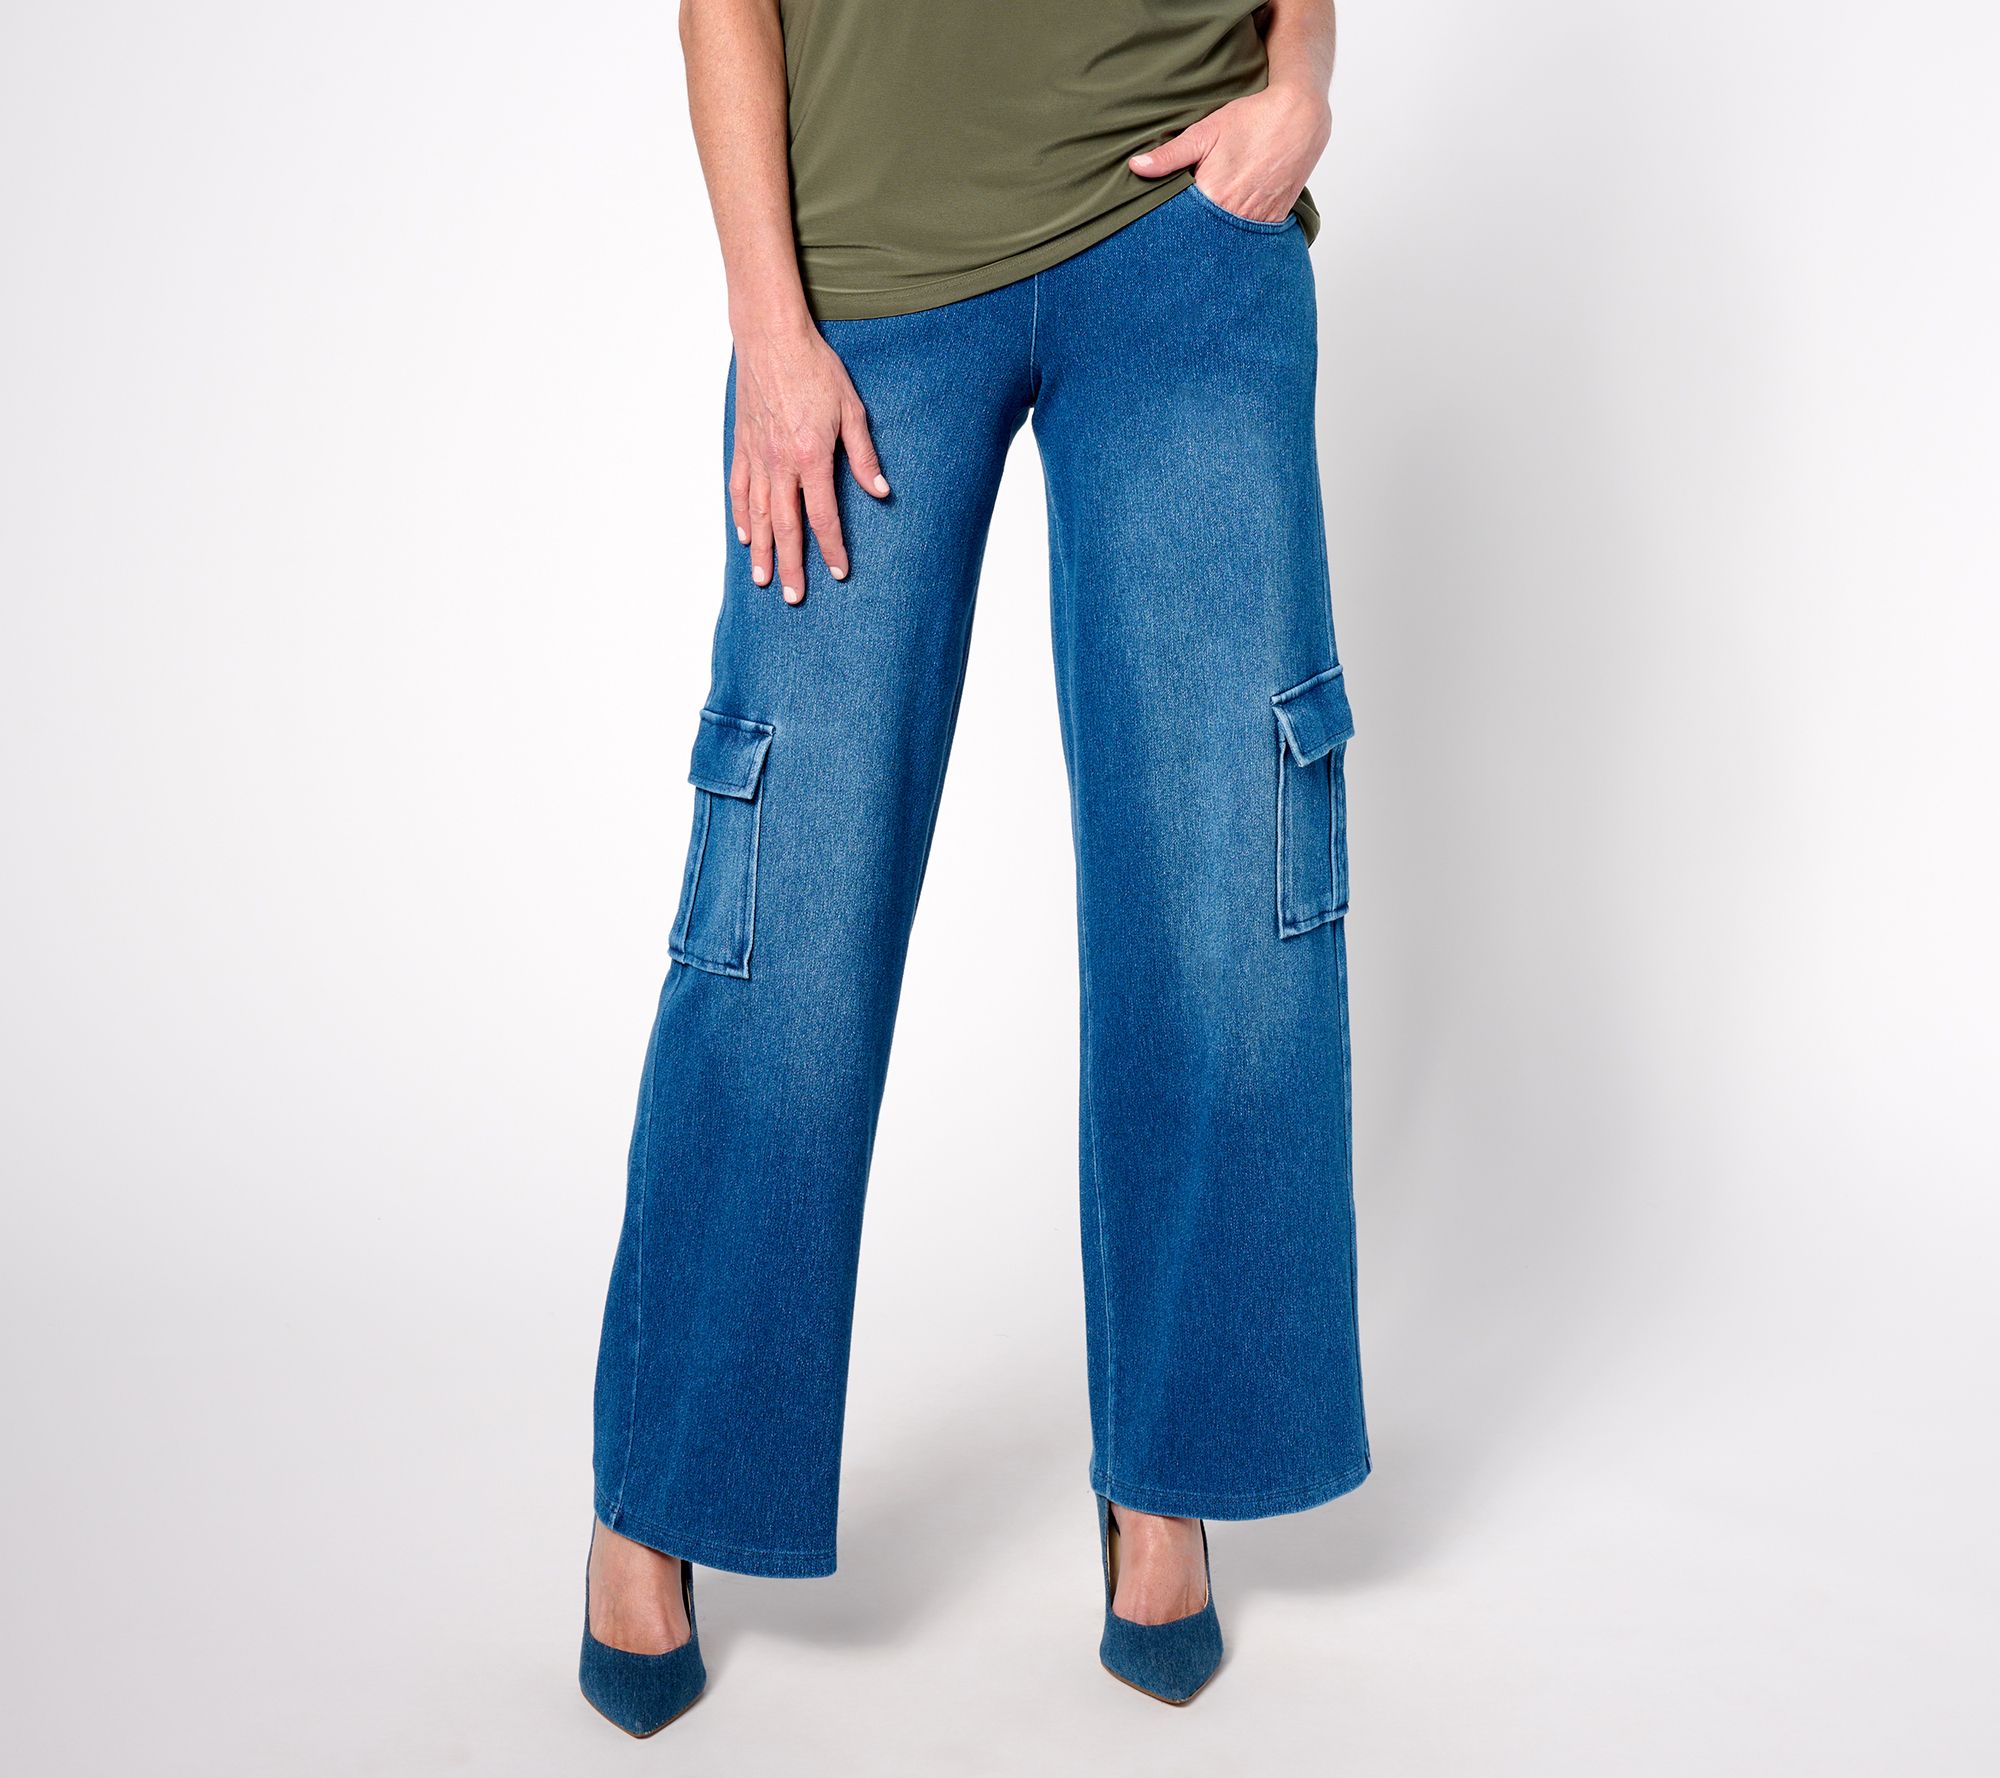 Women with Control Prime Stretch Denim Leggings with Pockets on QVC 